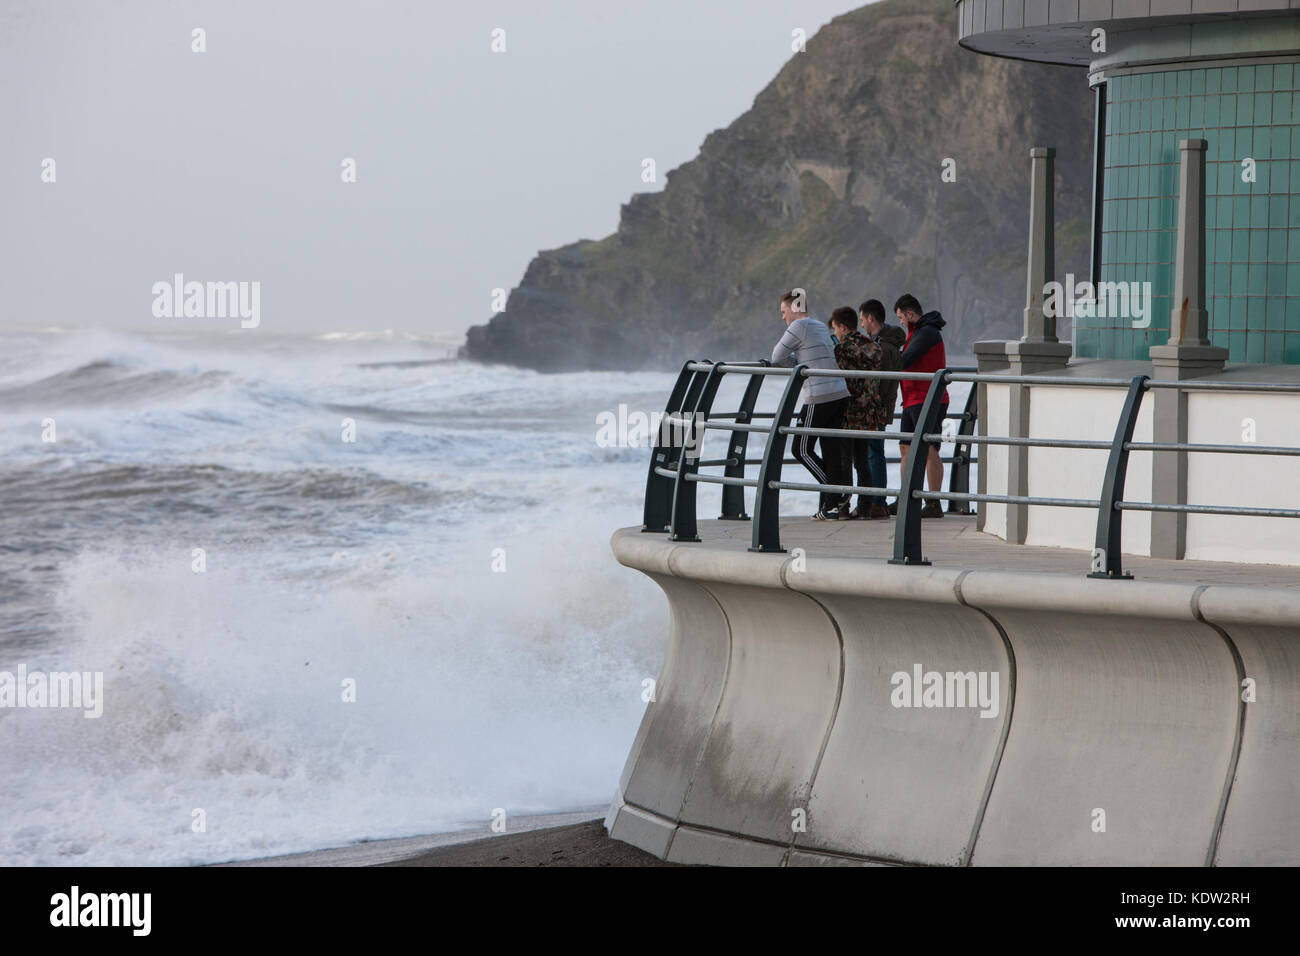 Aberystwyth, Wales, UK. 16th Oct, 2017. UK Weather: Storm Ophelia in Aberystwyth,Wales,UK,U.K.,Europe.  Strong winds coming in off the Irish Sea, gusting up to 70mph, batter the Cardigan Bay town of Aberystwyth,Ceredigion,West Wales.   The Met Office has issued Amber Warnings for the region as the remnants of Hurricane Ophelia reach UK. A spell of very windy weather is expected today in association with ex-Ophelia.  Longer journey times and cancellations are likely, as road, rail, air and ferry services may be affected as well as some bridge closures. Credit: Paul Quayle/Alamy Live News Stock Photo